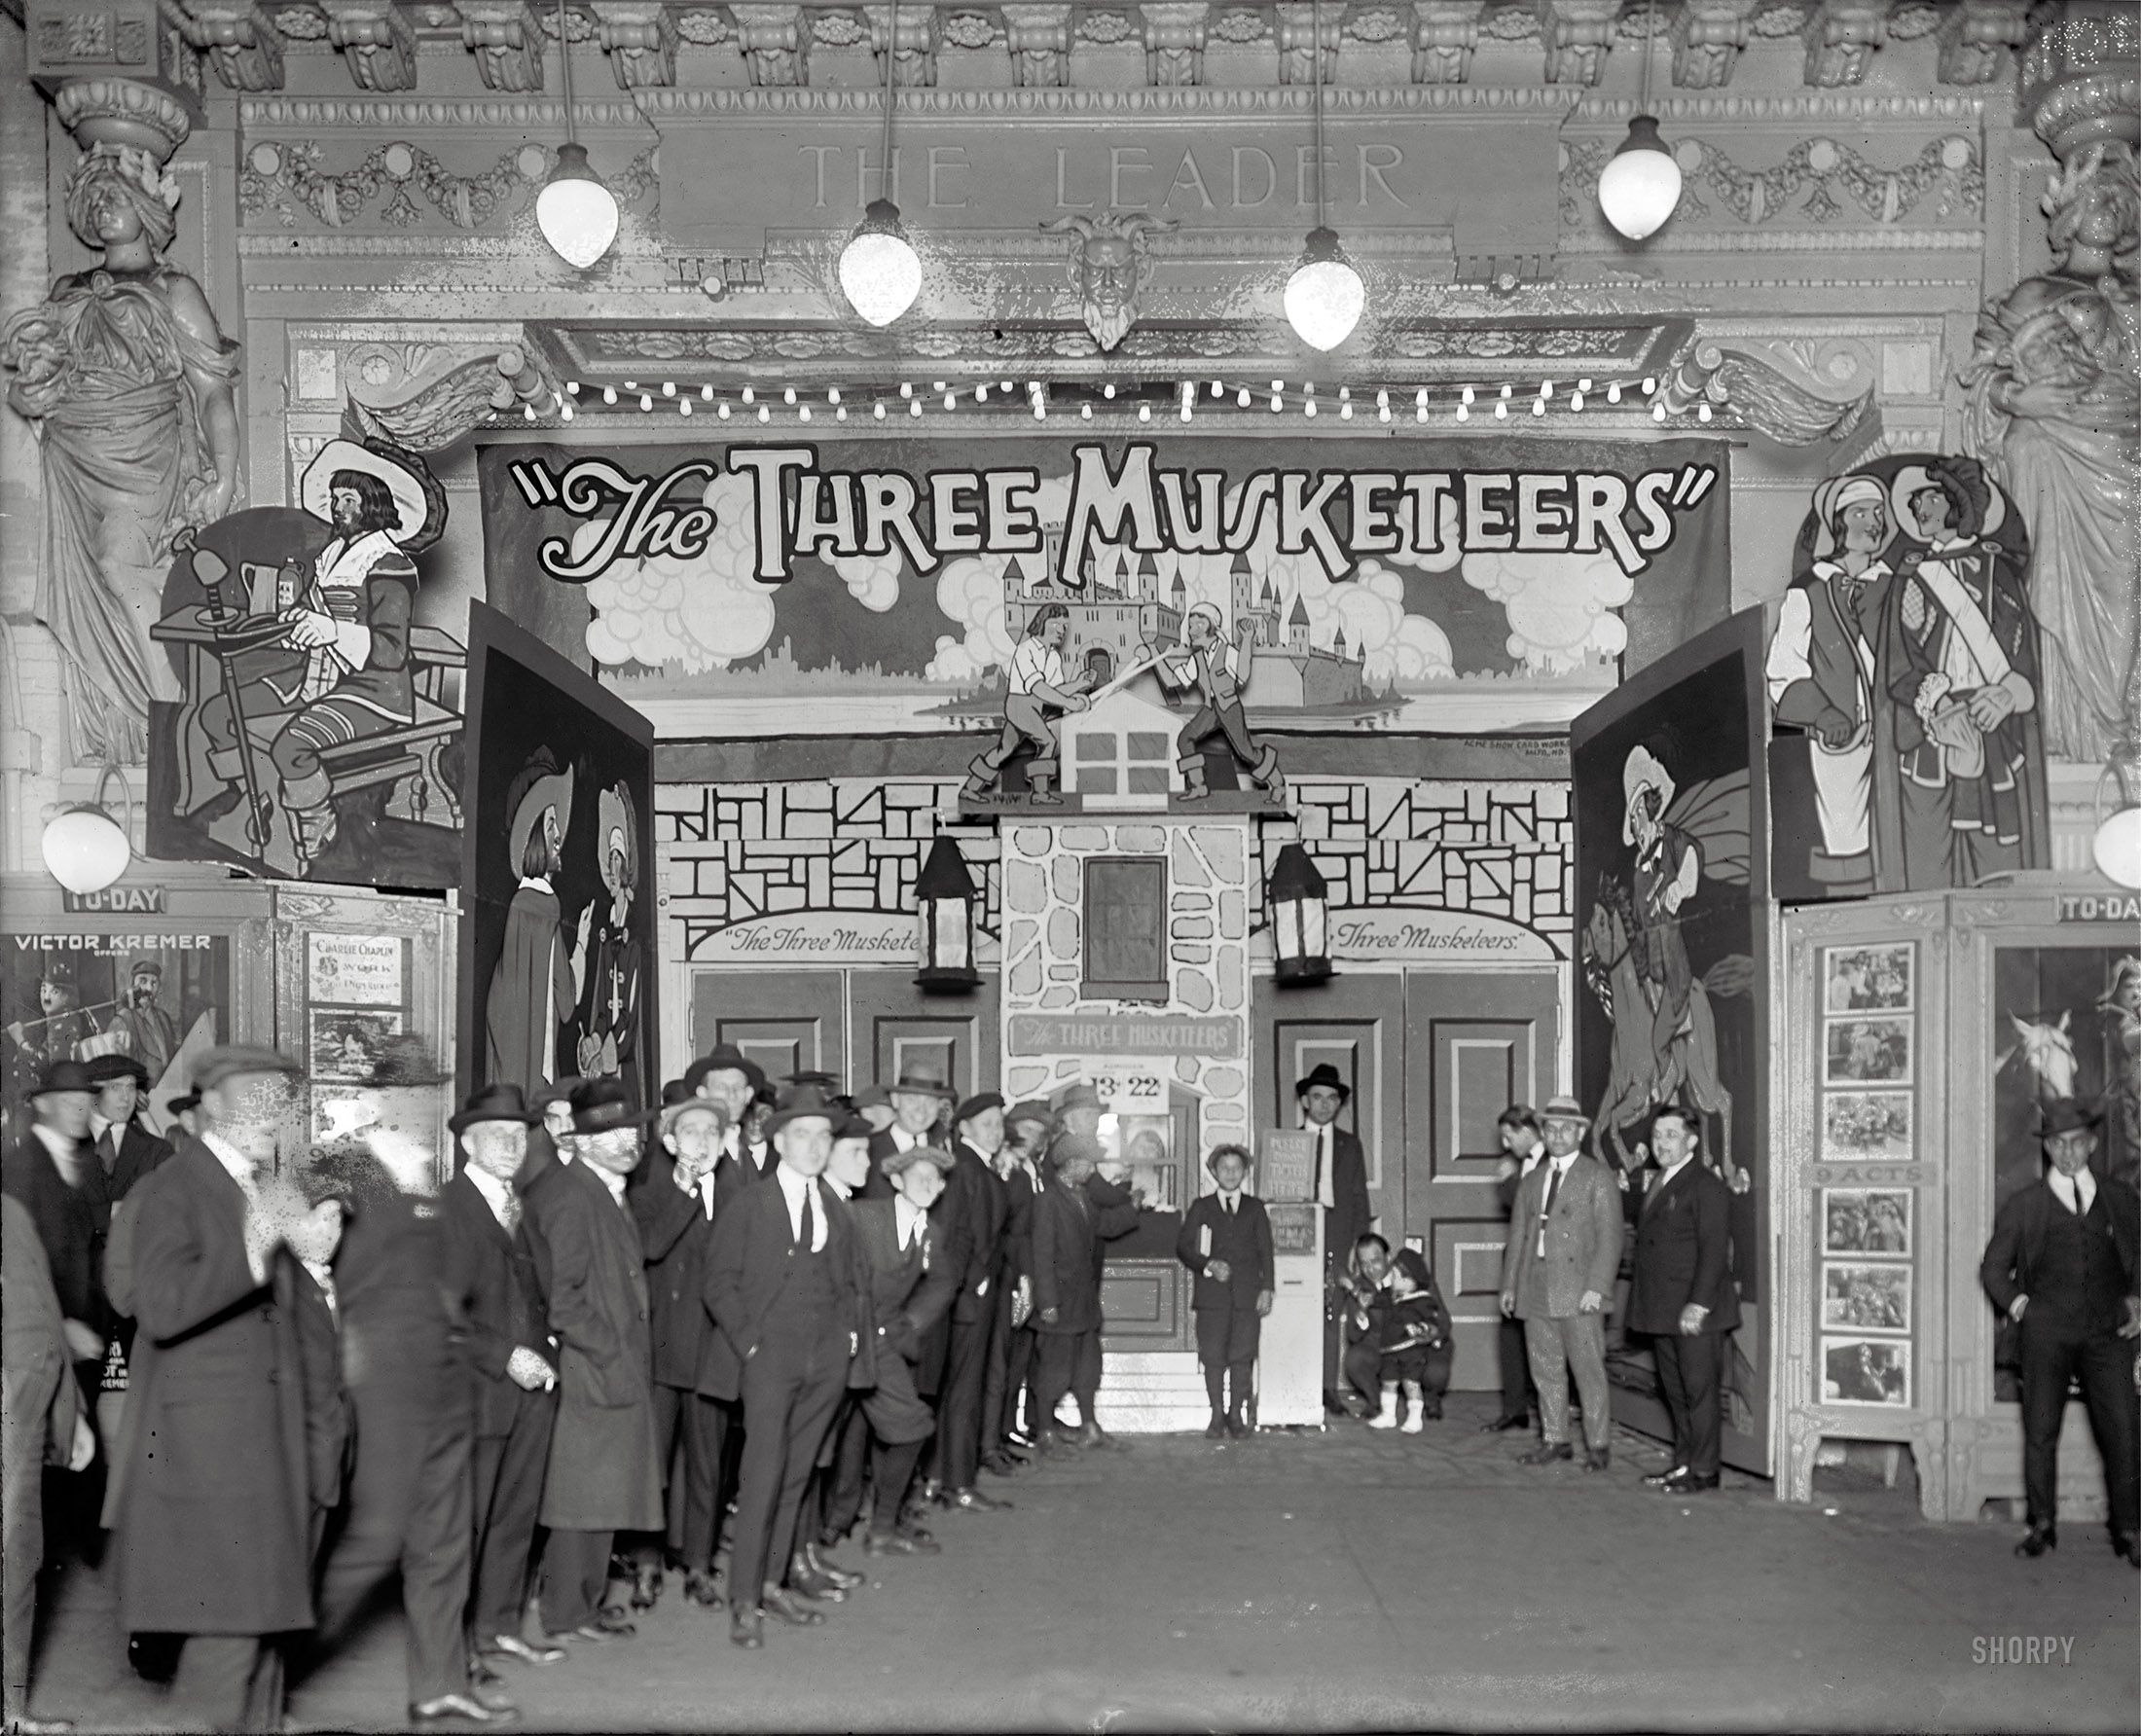 Washington, D.C., October 1921. "Lust's Leader Theater." Now playing: "The Three Musketeers." National Photo Company glass negative. View full size.